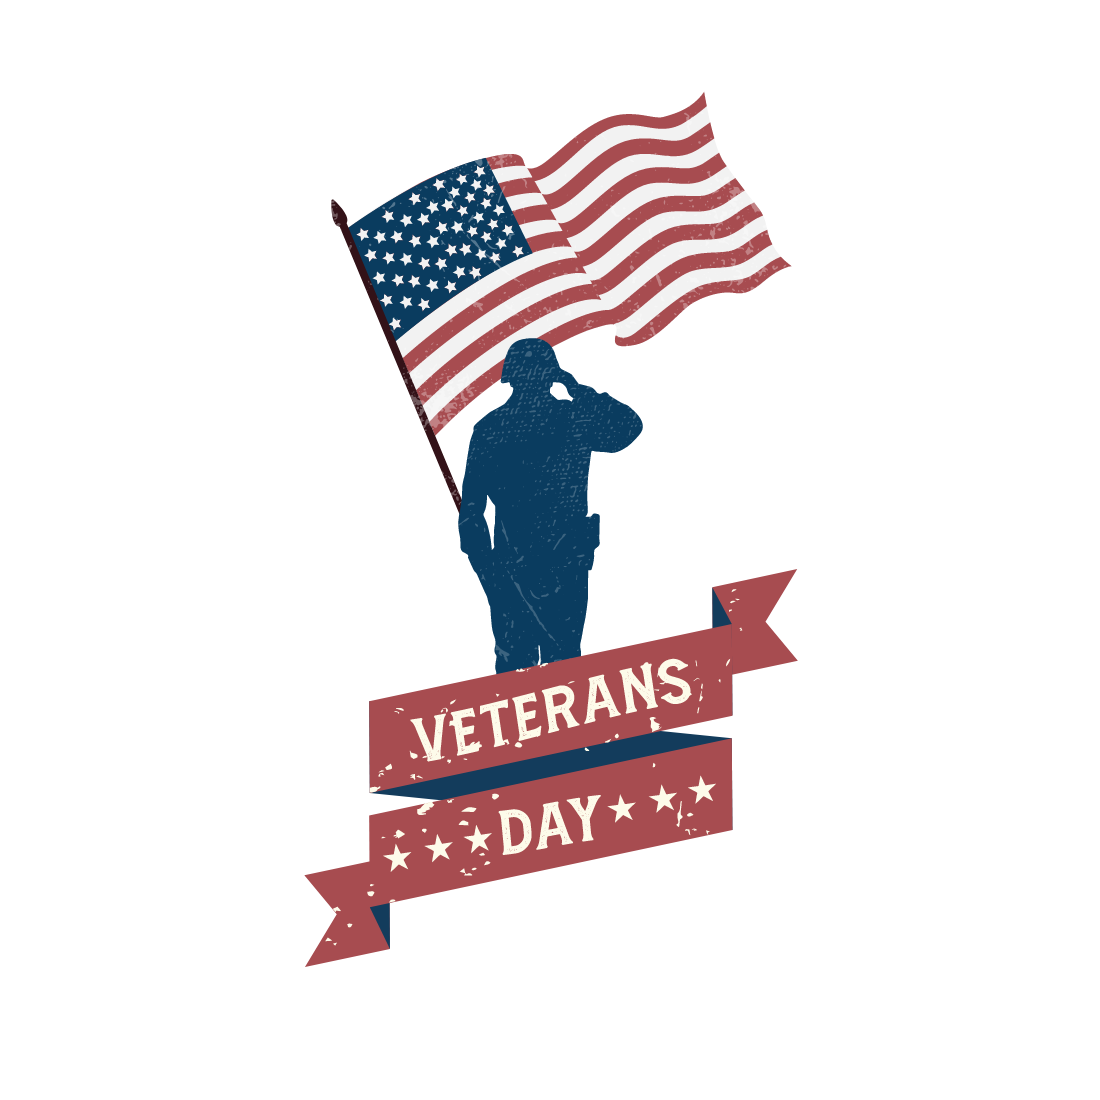 Free Veterans Day Design cover image.